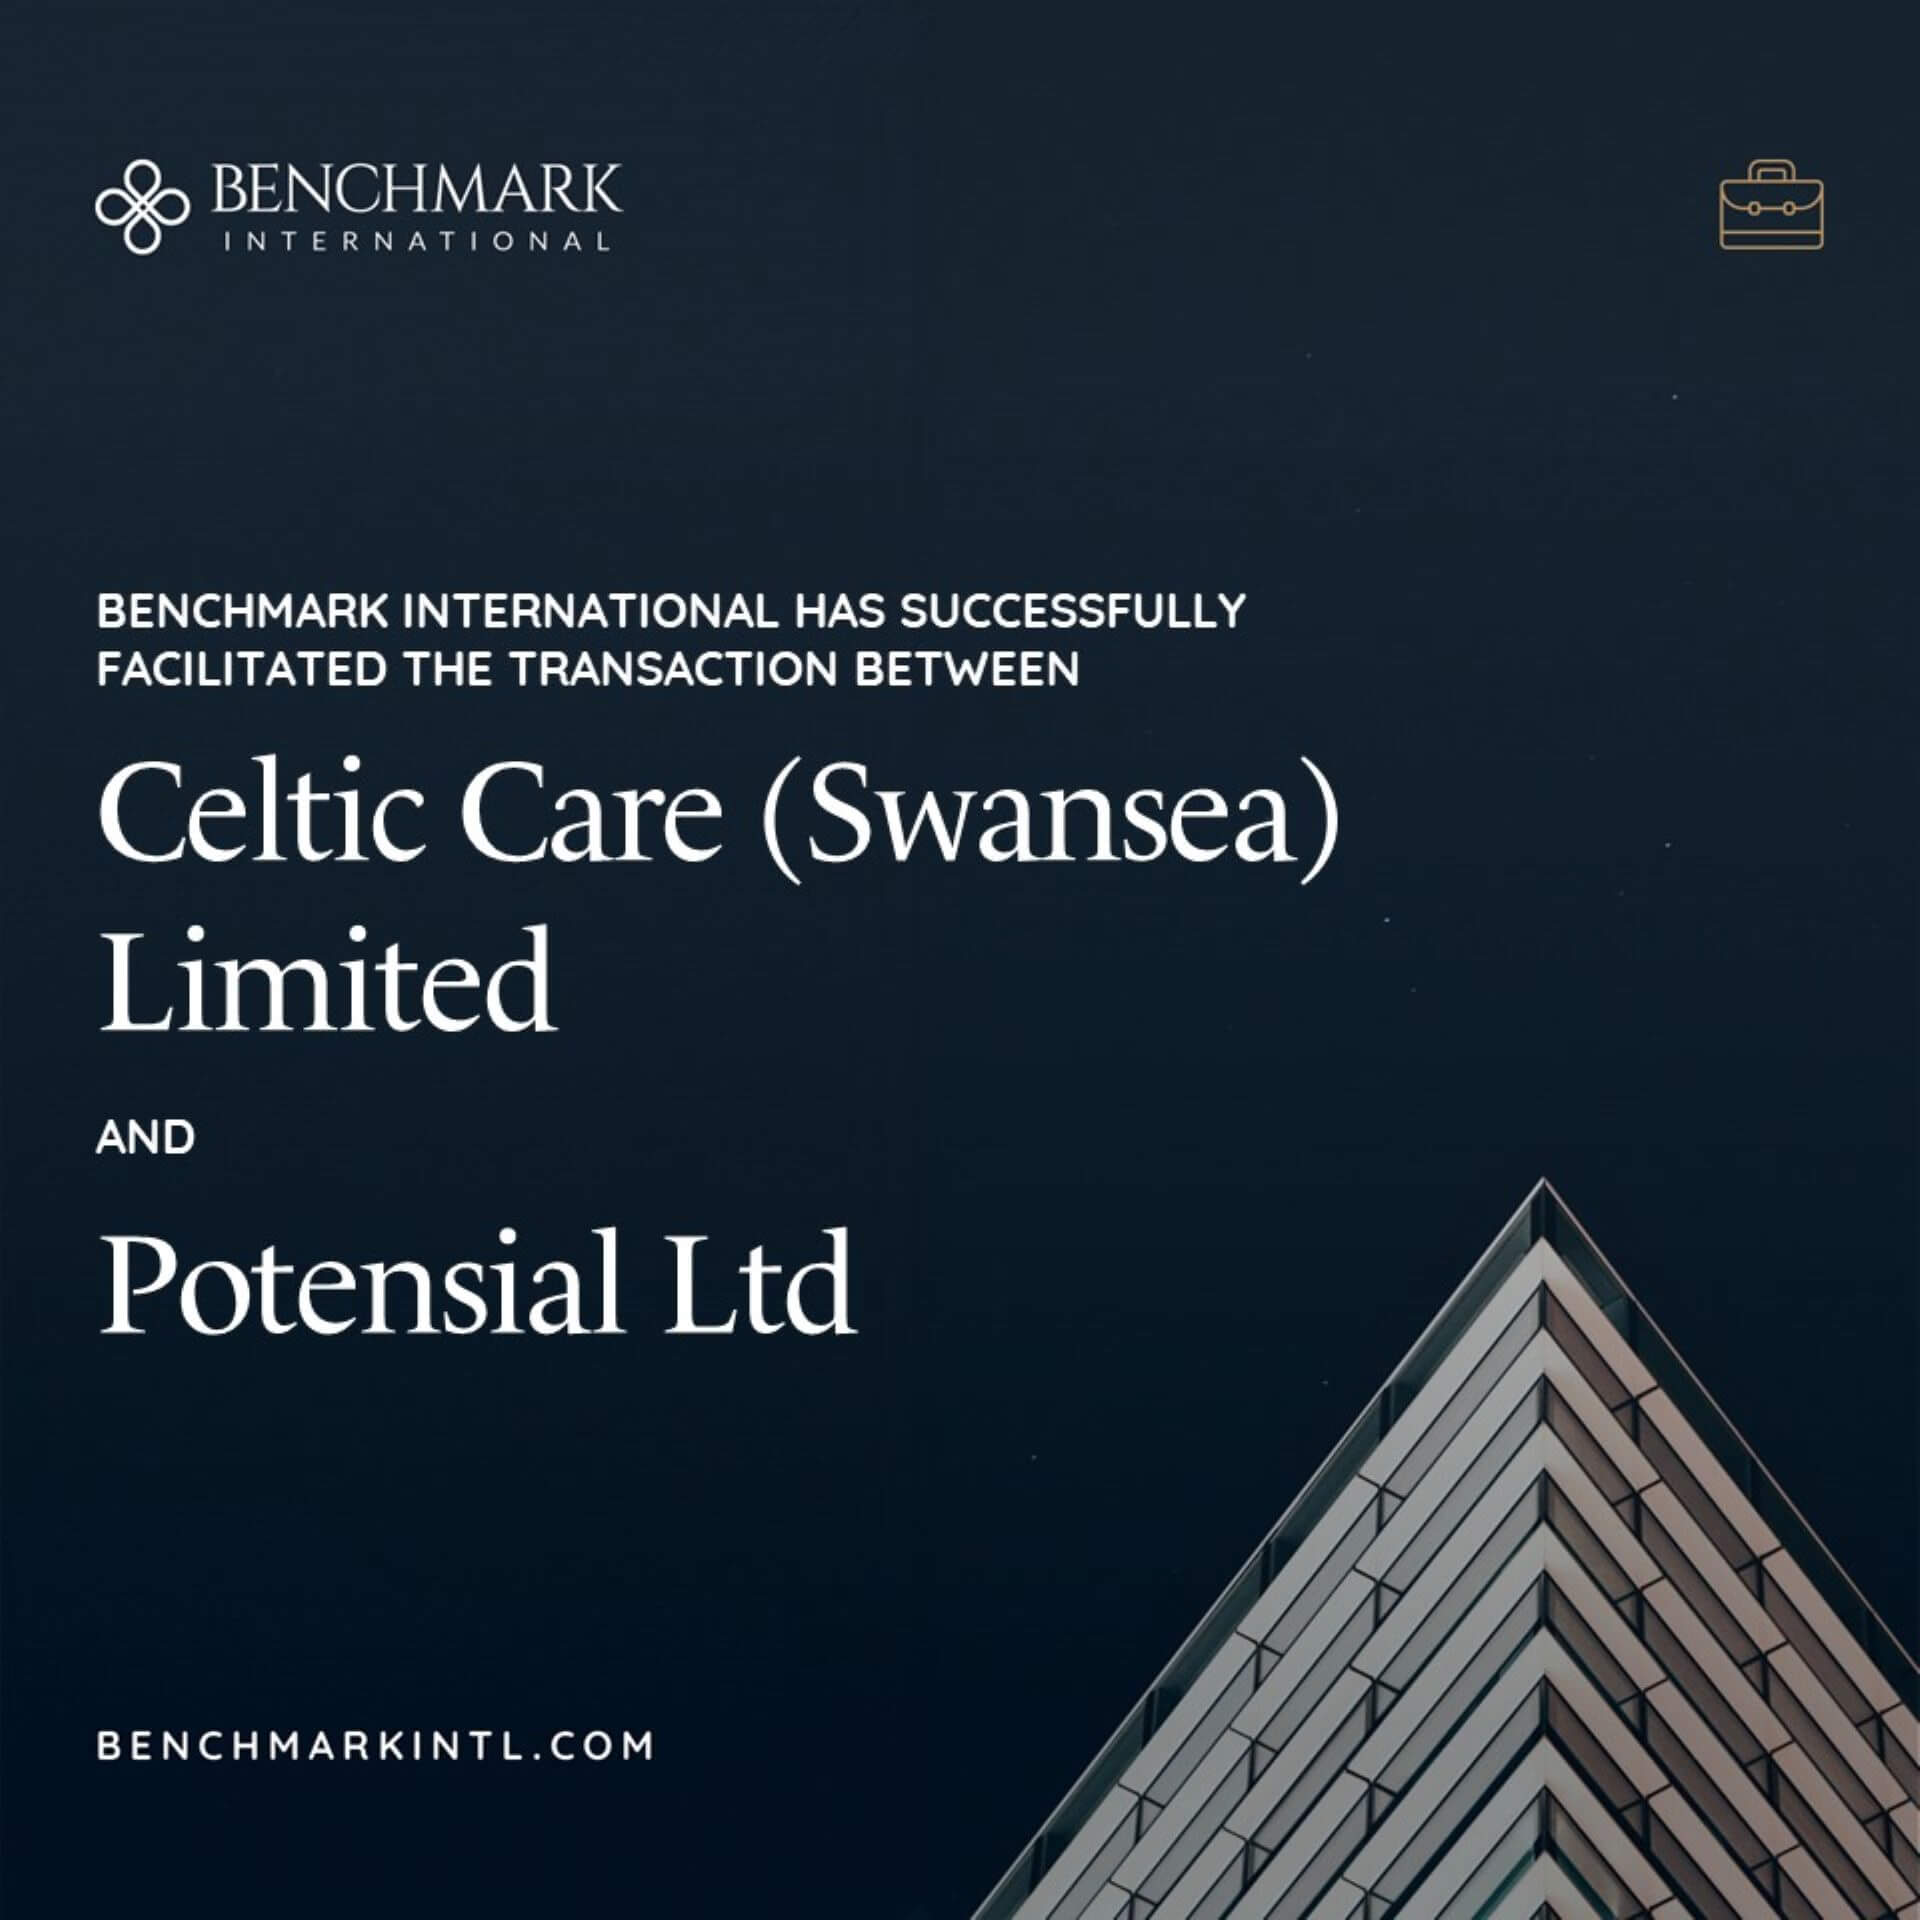 Celtic Care acquired by Potensial